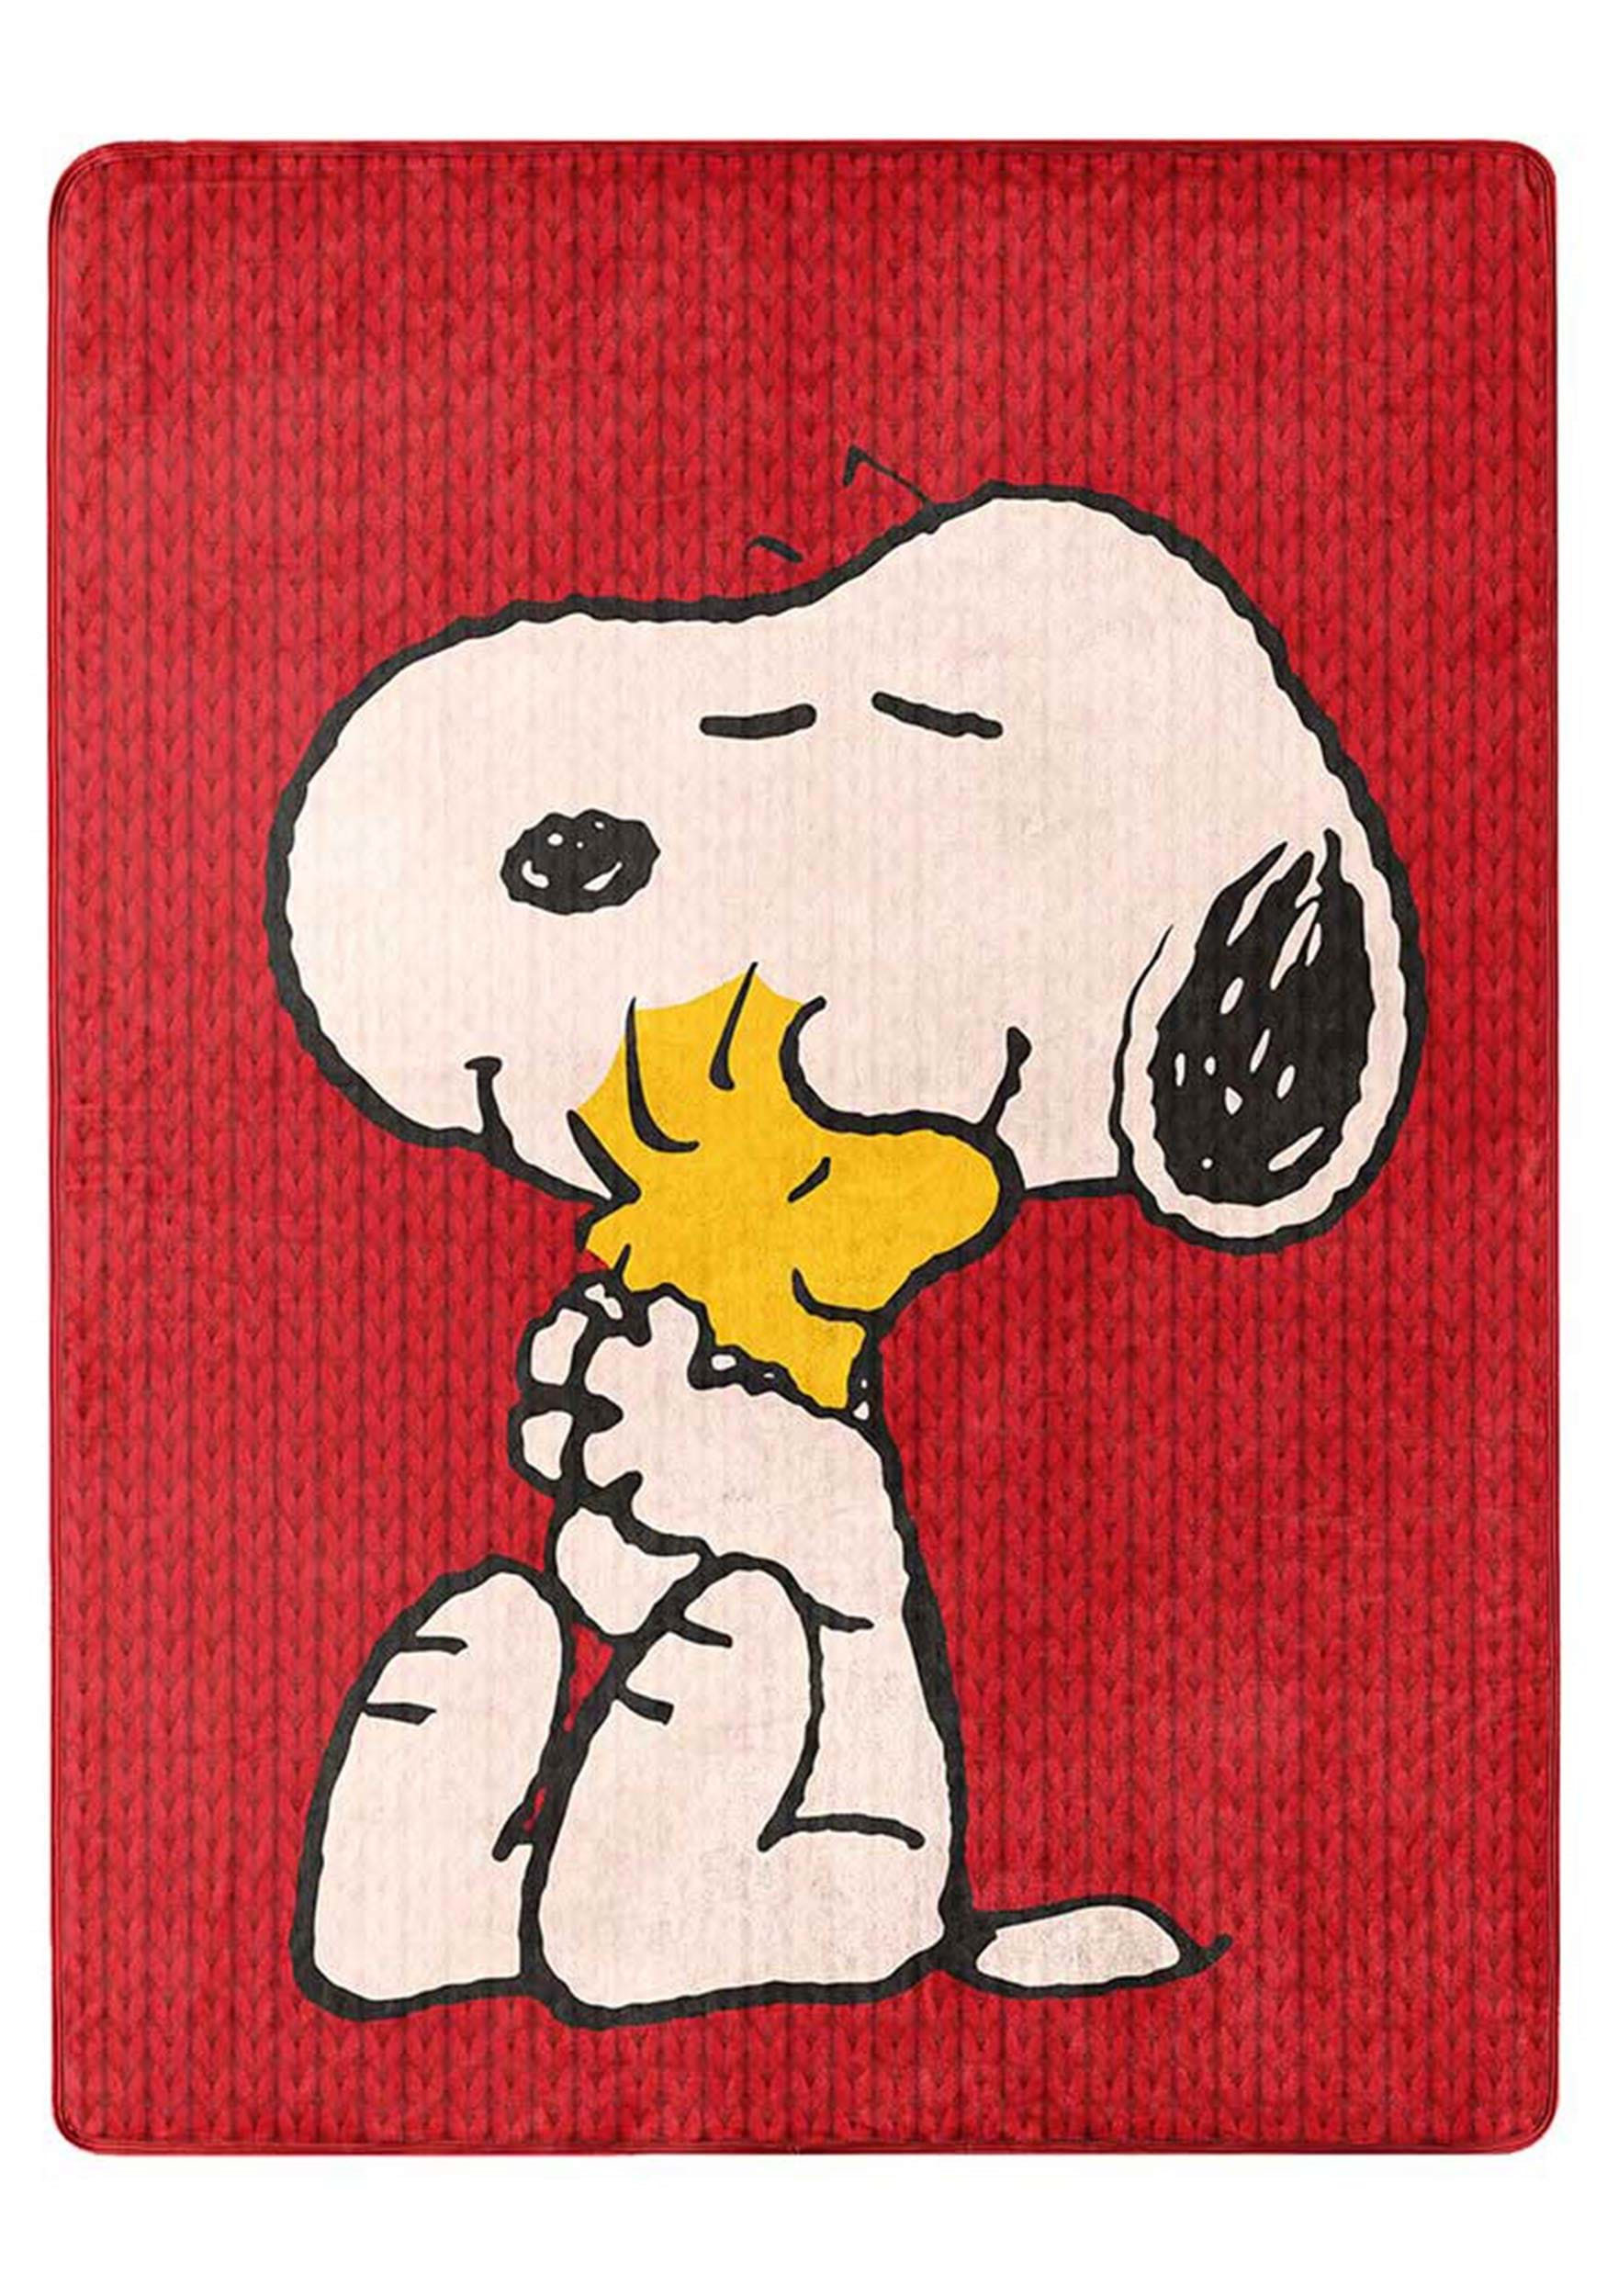 46"x60" Peanuts Snoopy and Woodstock Silk Touch Throw